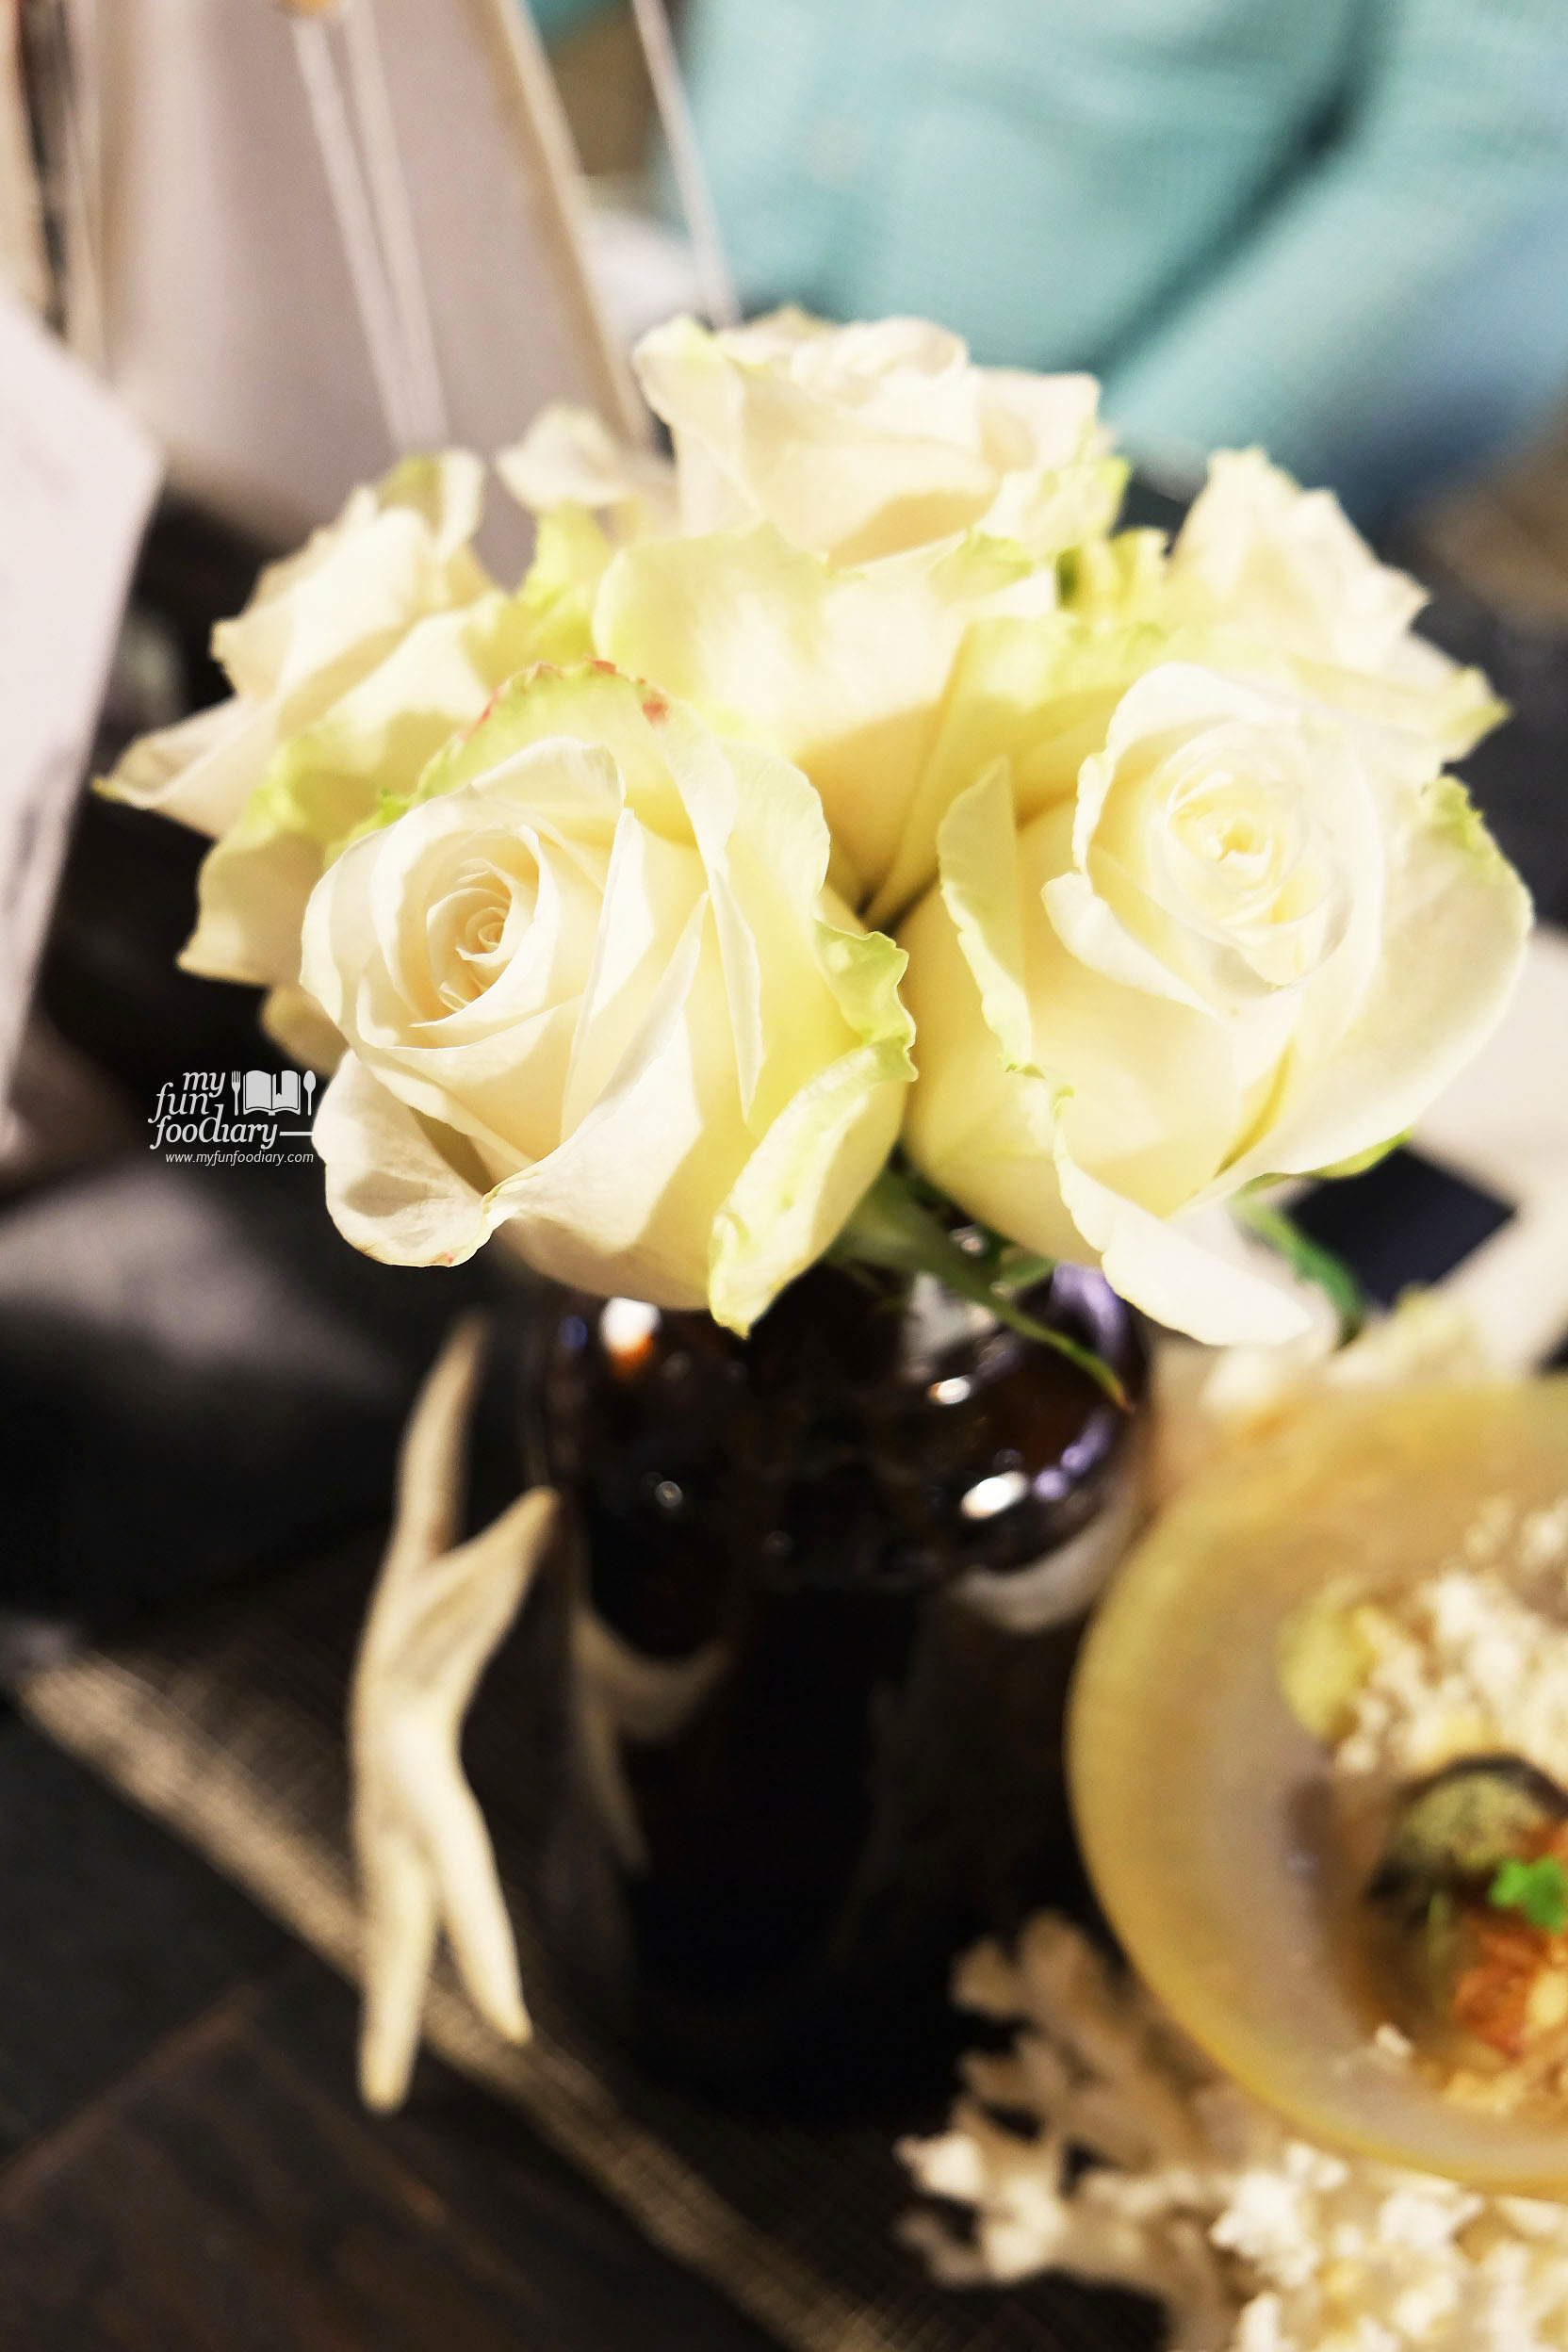 Flower Decoration at Real Food Concept by Myfunfoodiary